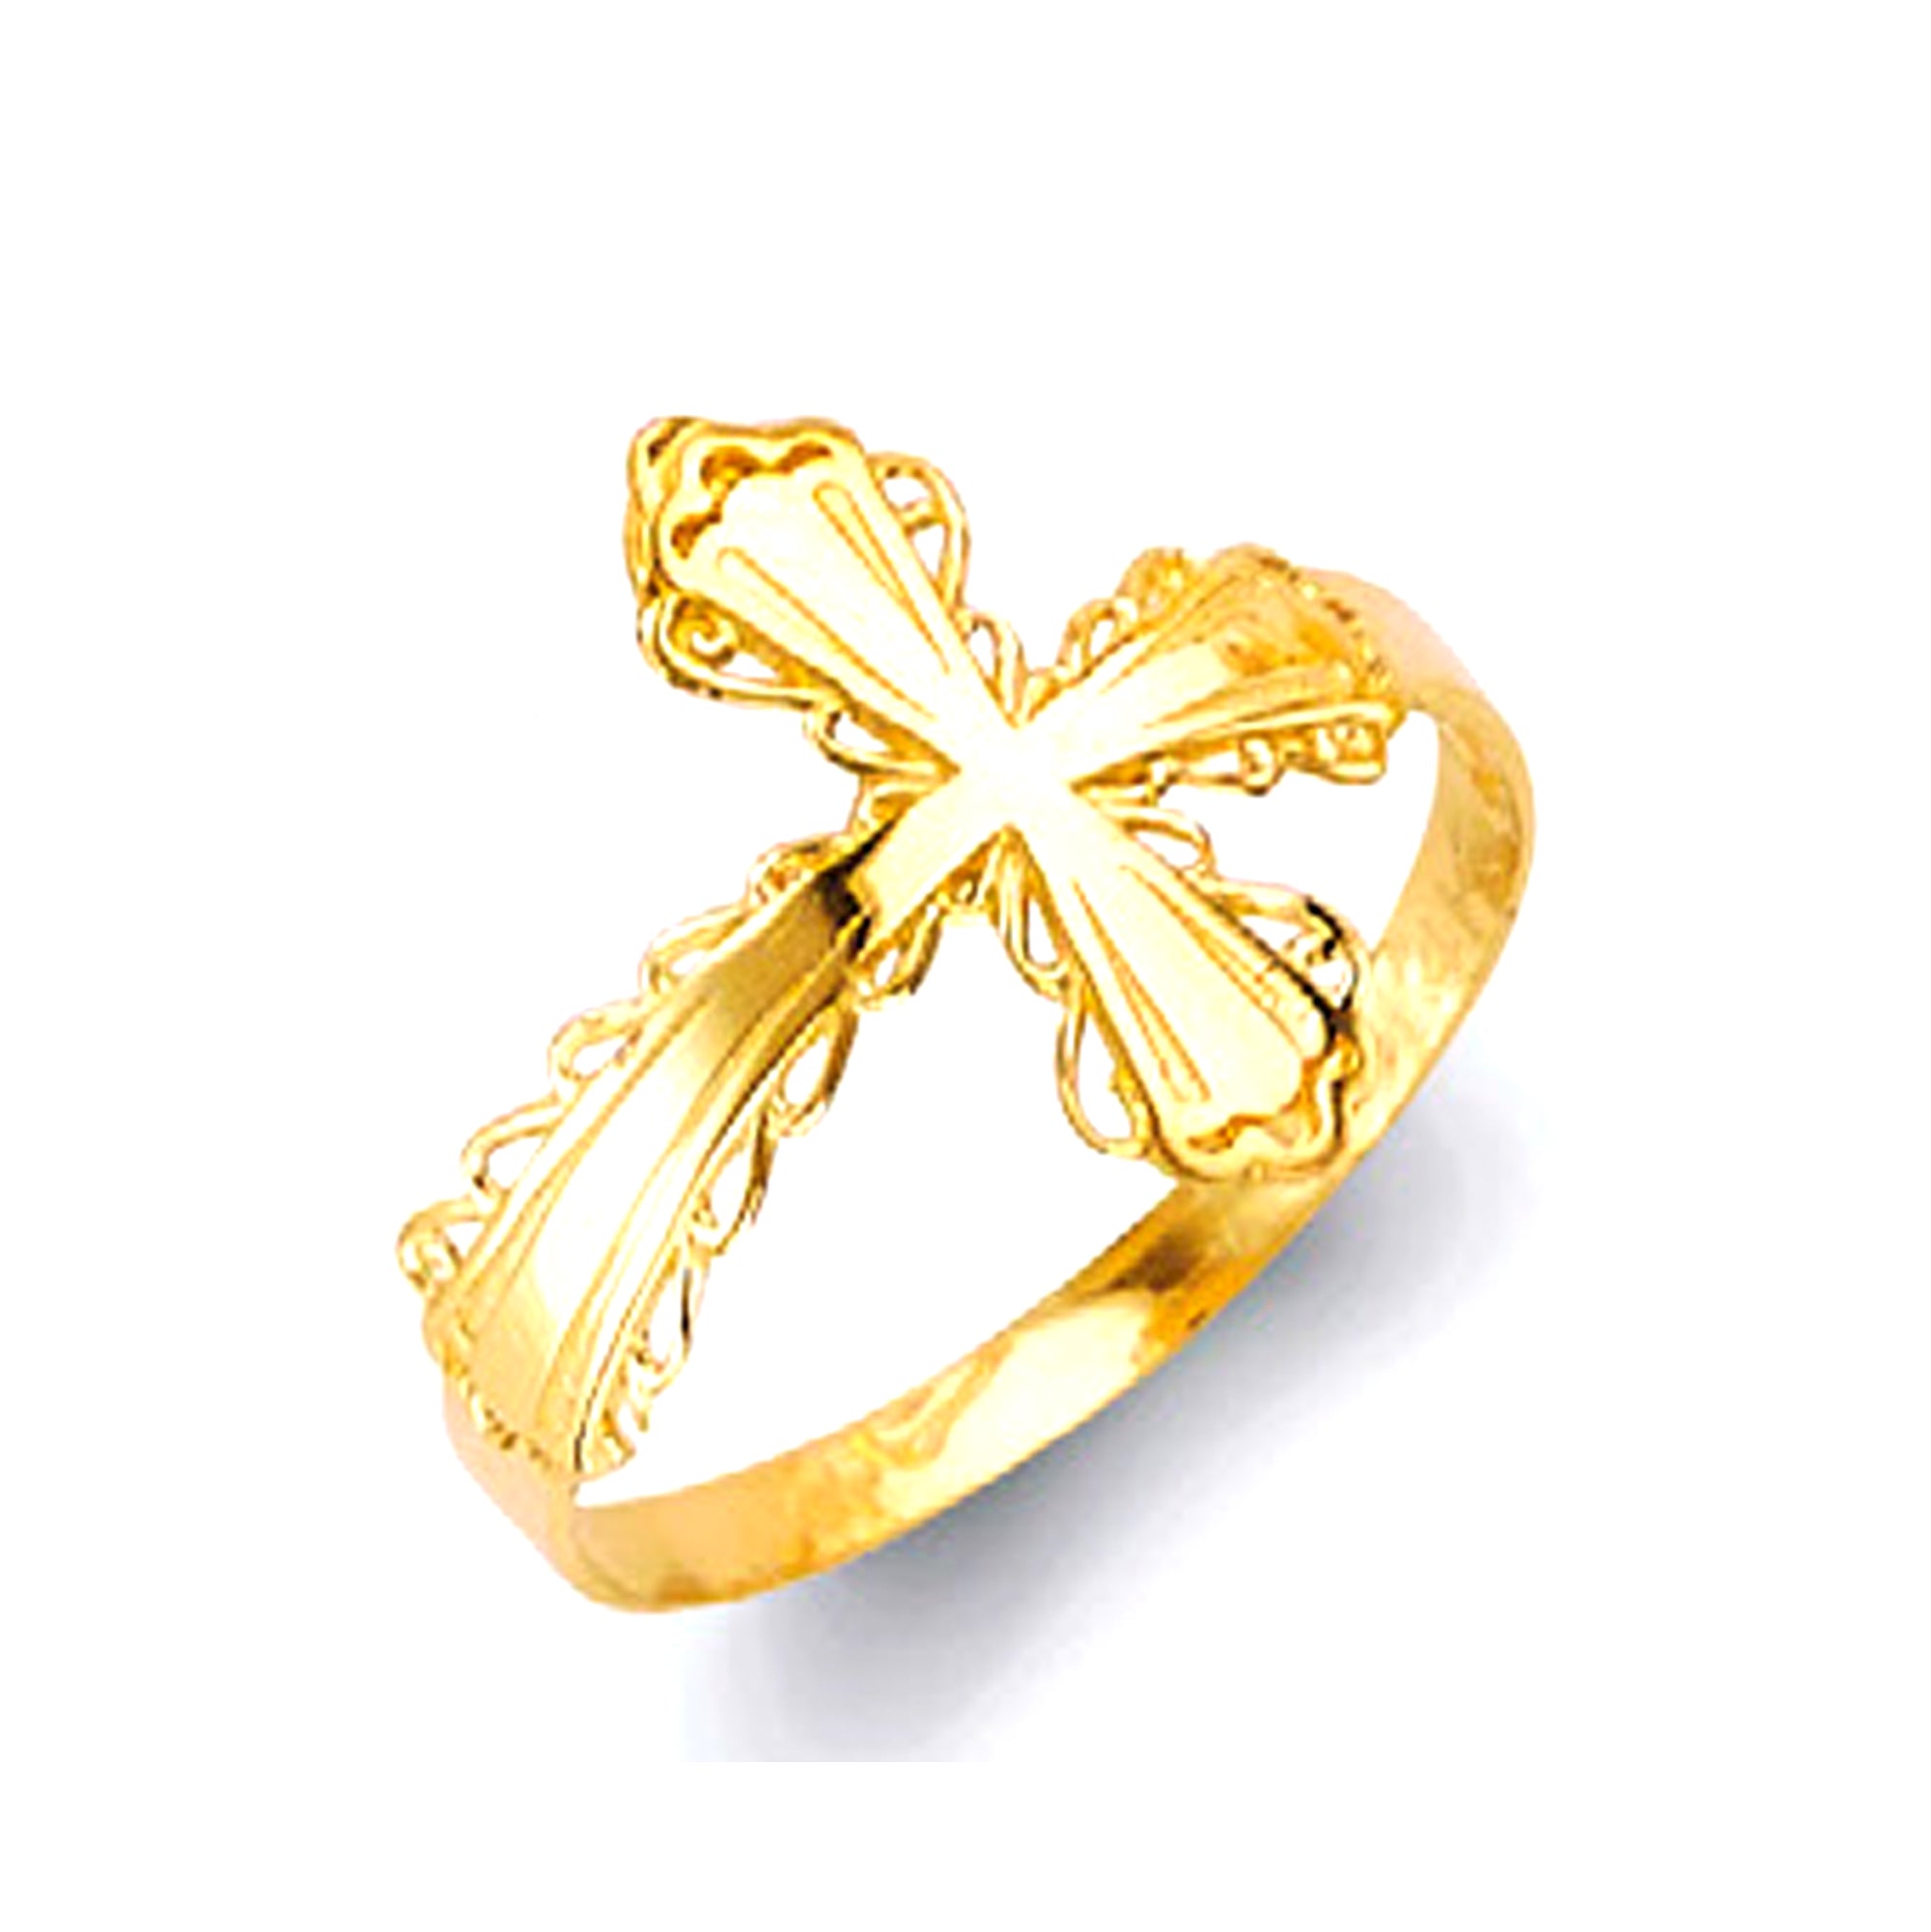 Surreal Bow Knot Ring in Solid Gold 